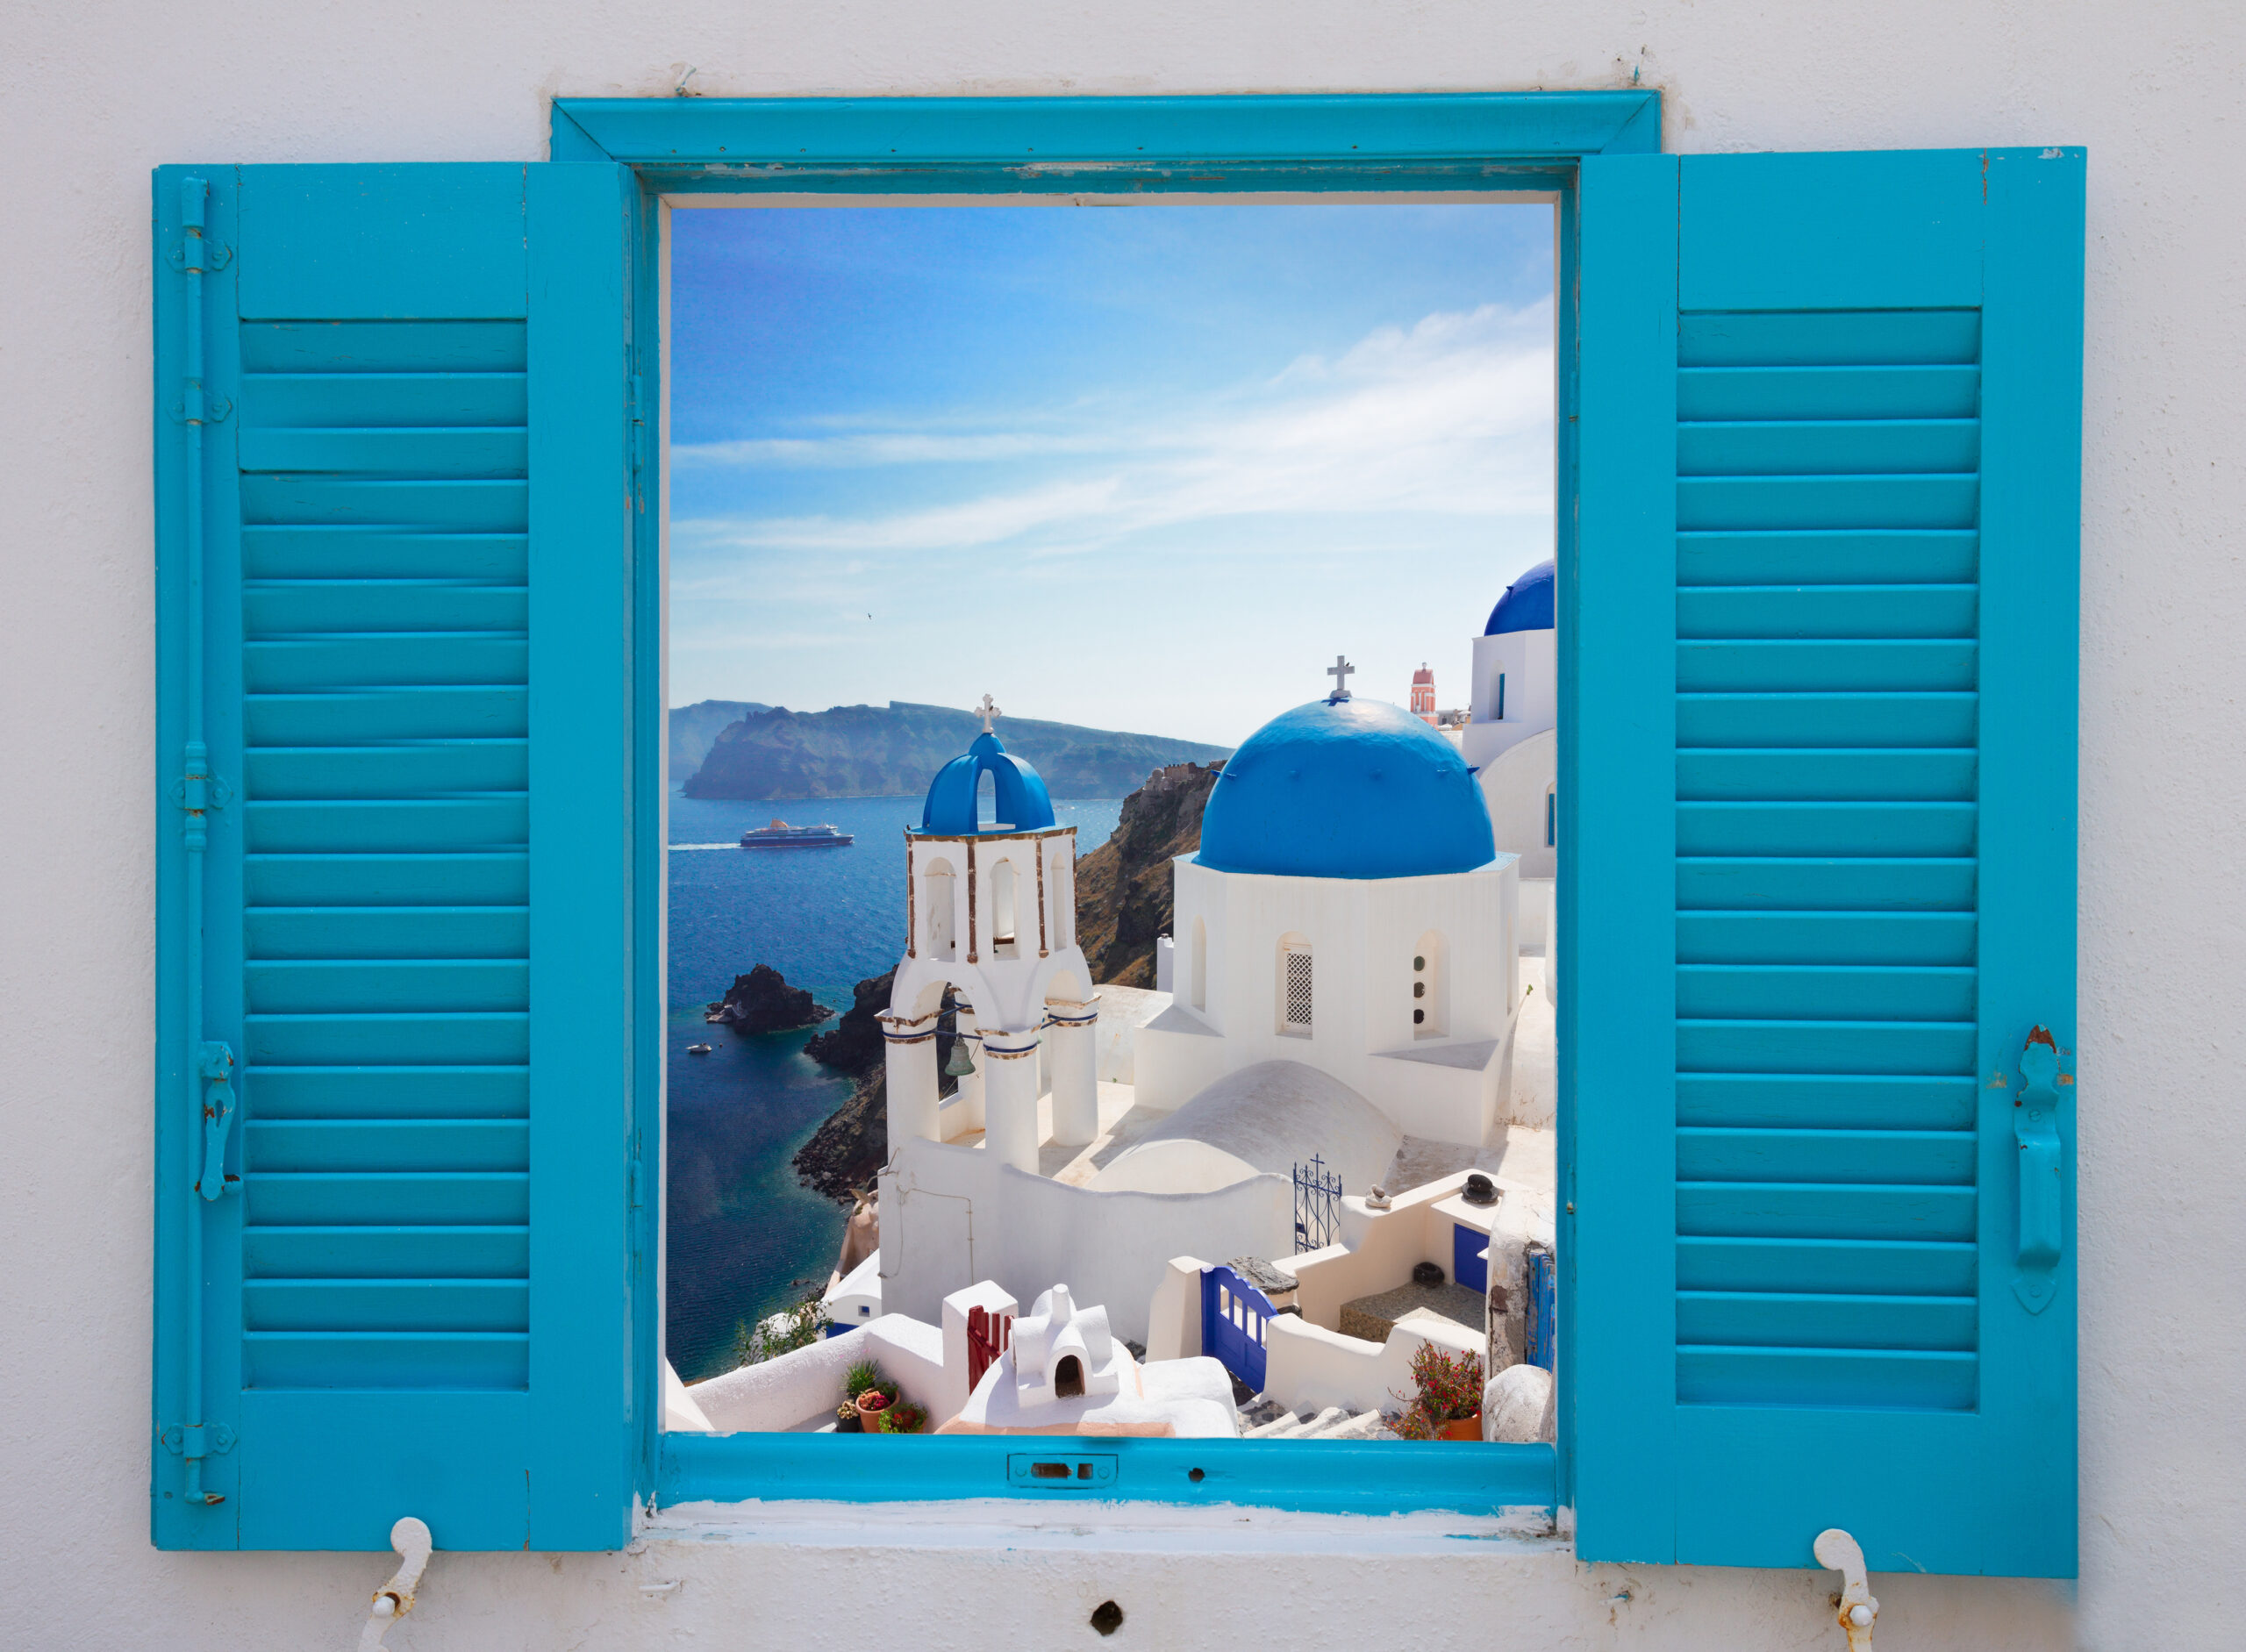 Window with blue shutters with view of town and classical church with blue domes.